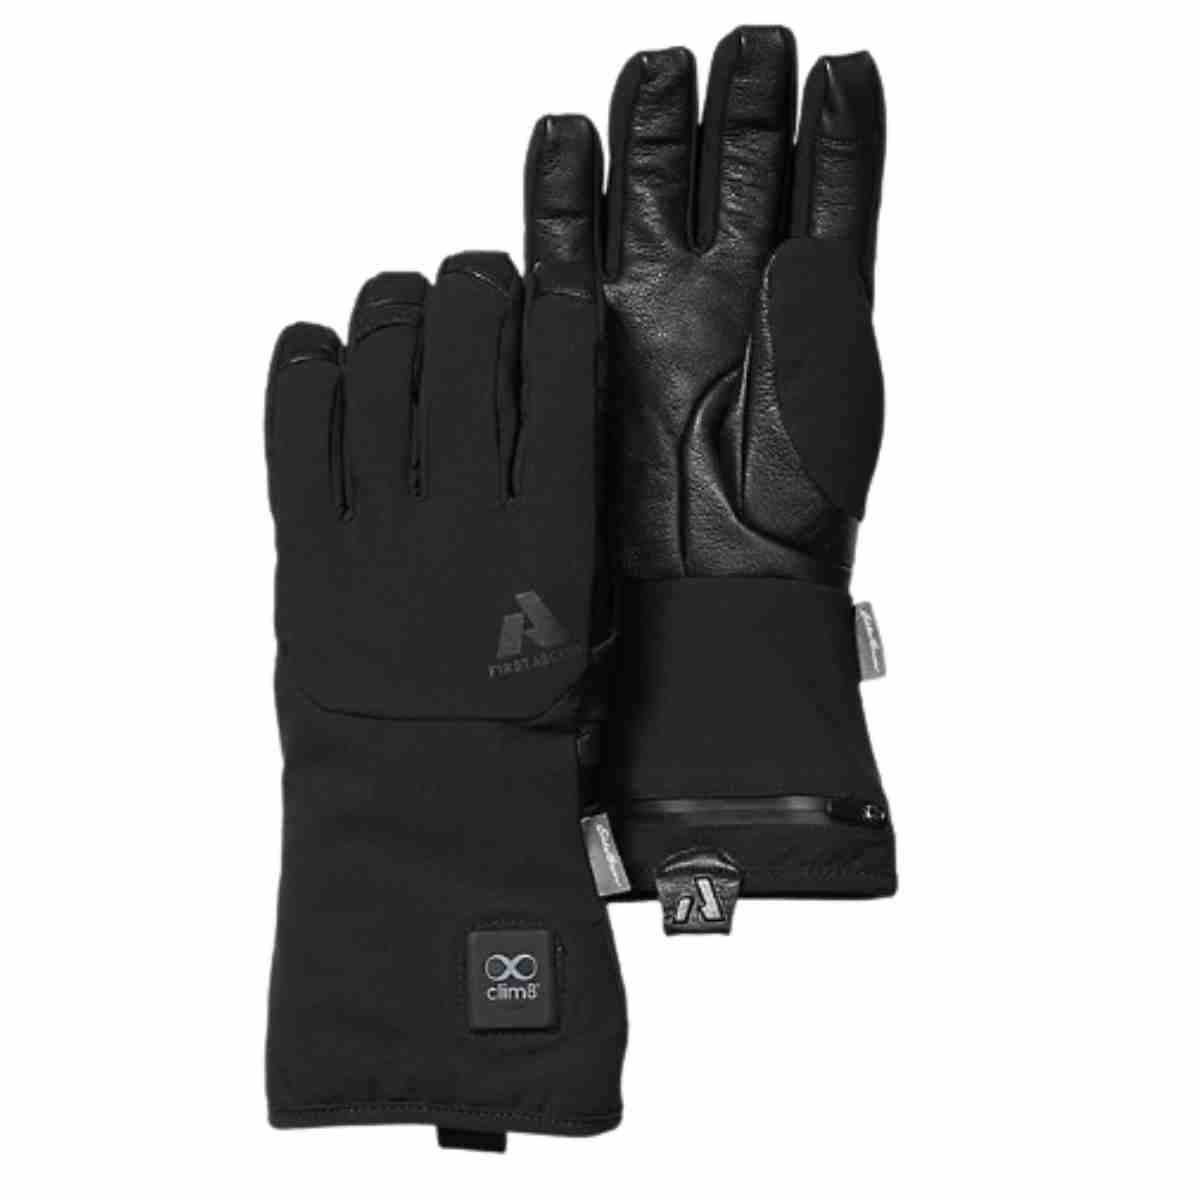 The Heat Company Heat 2 Softshell Gloves review - cosy gloves for  photographers - Amateur Photographer